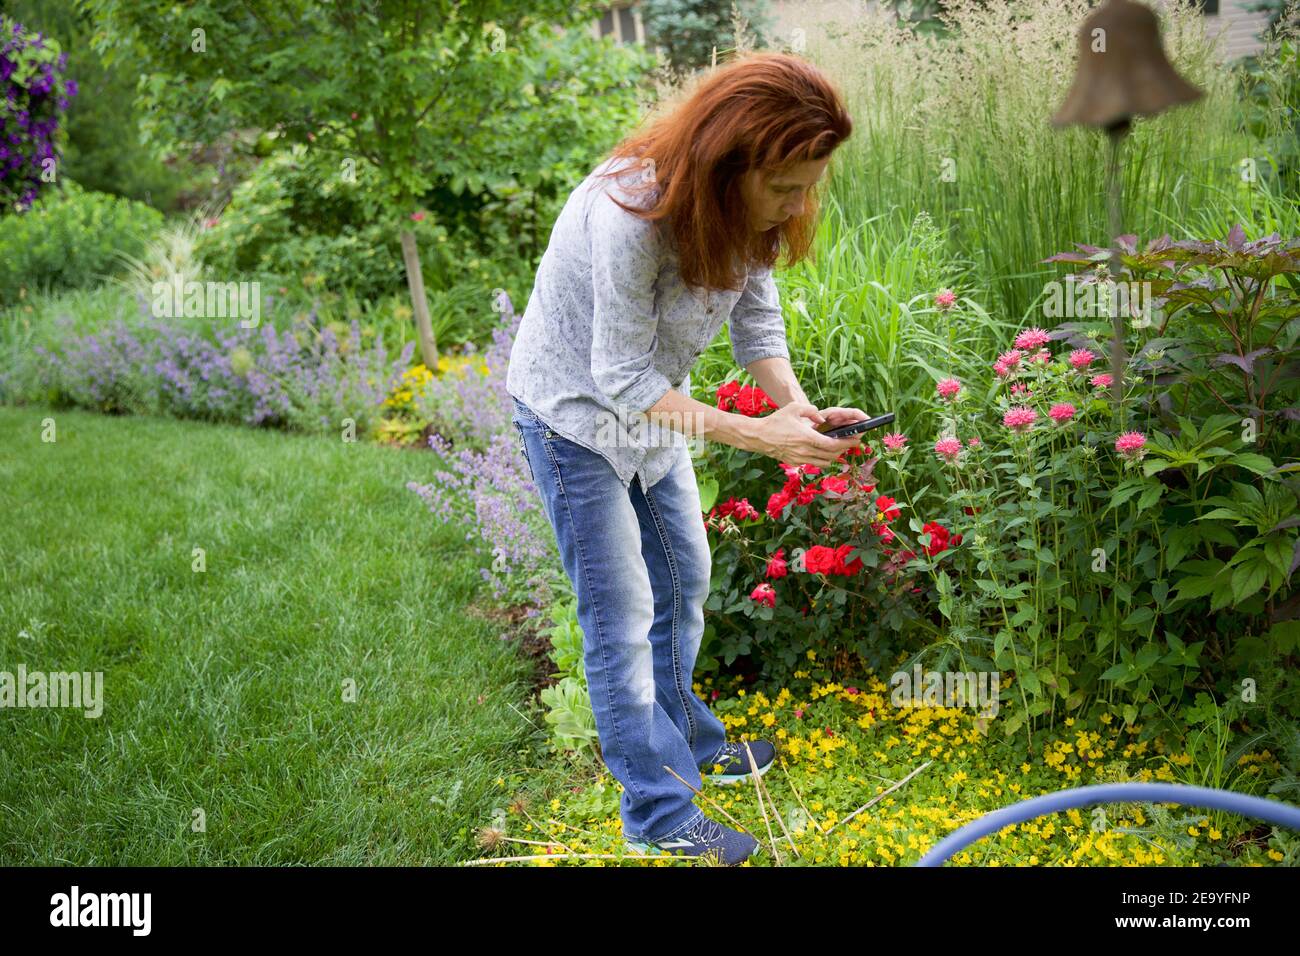 Auburn haired female using cellphone to take pictures of roses in the garden Stock Photo